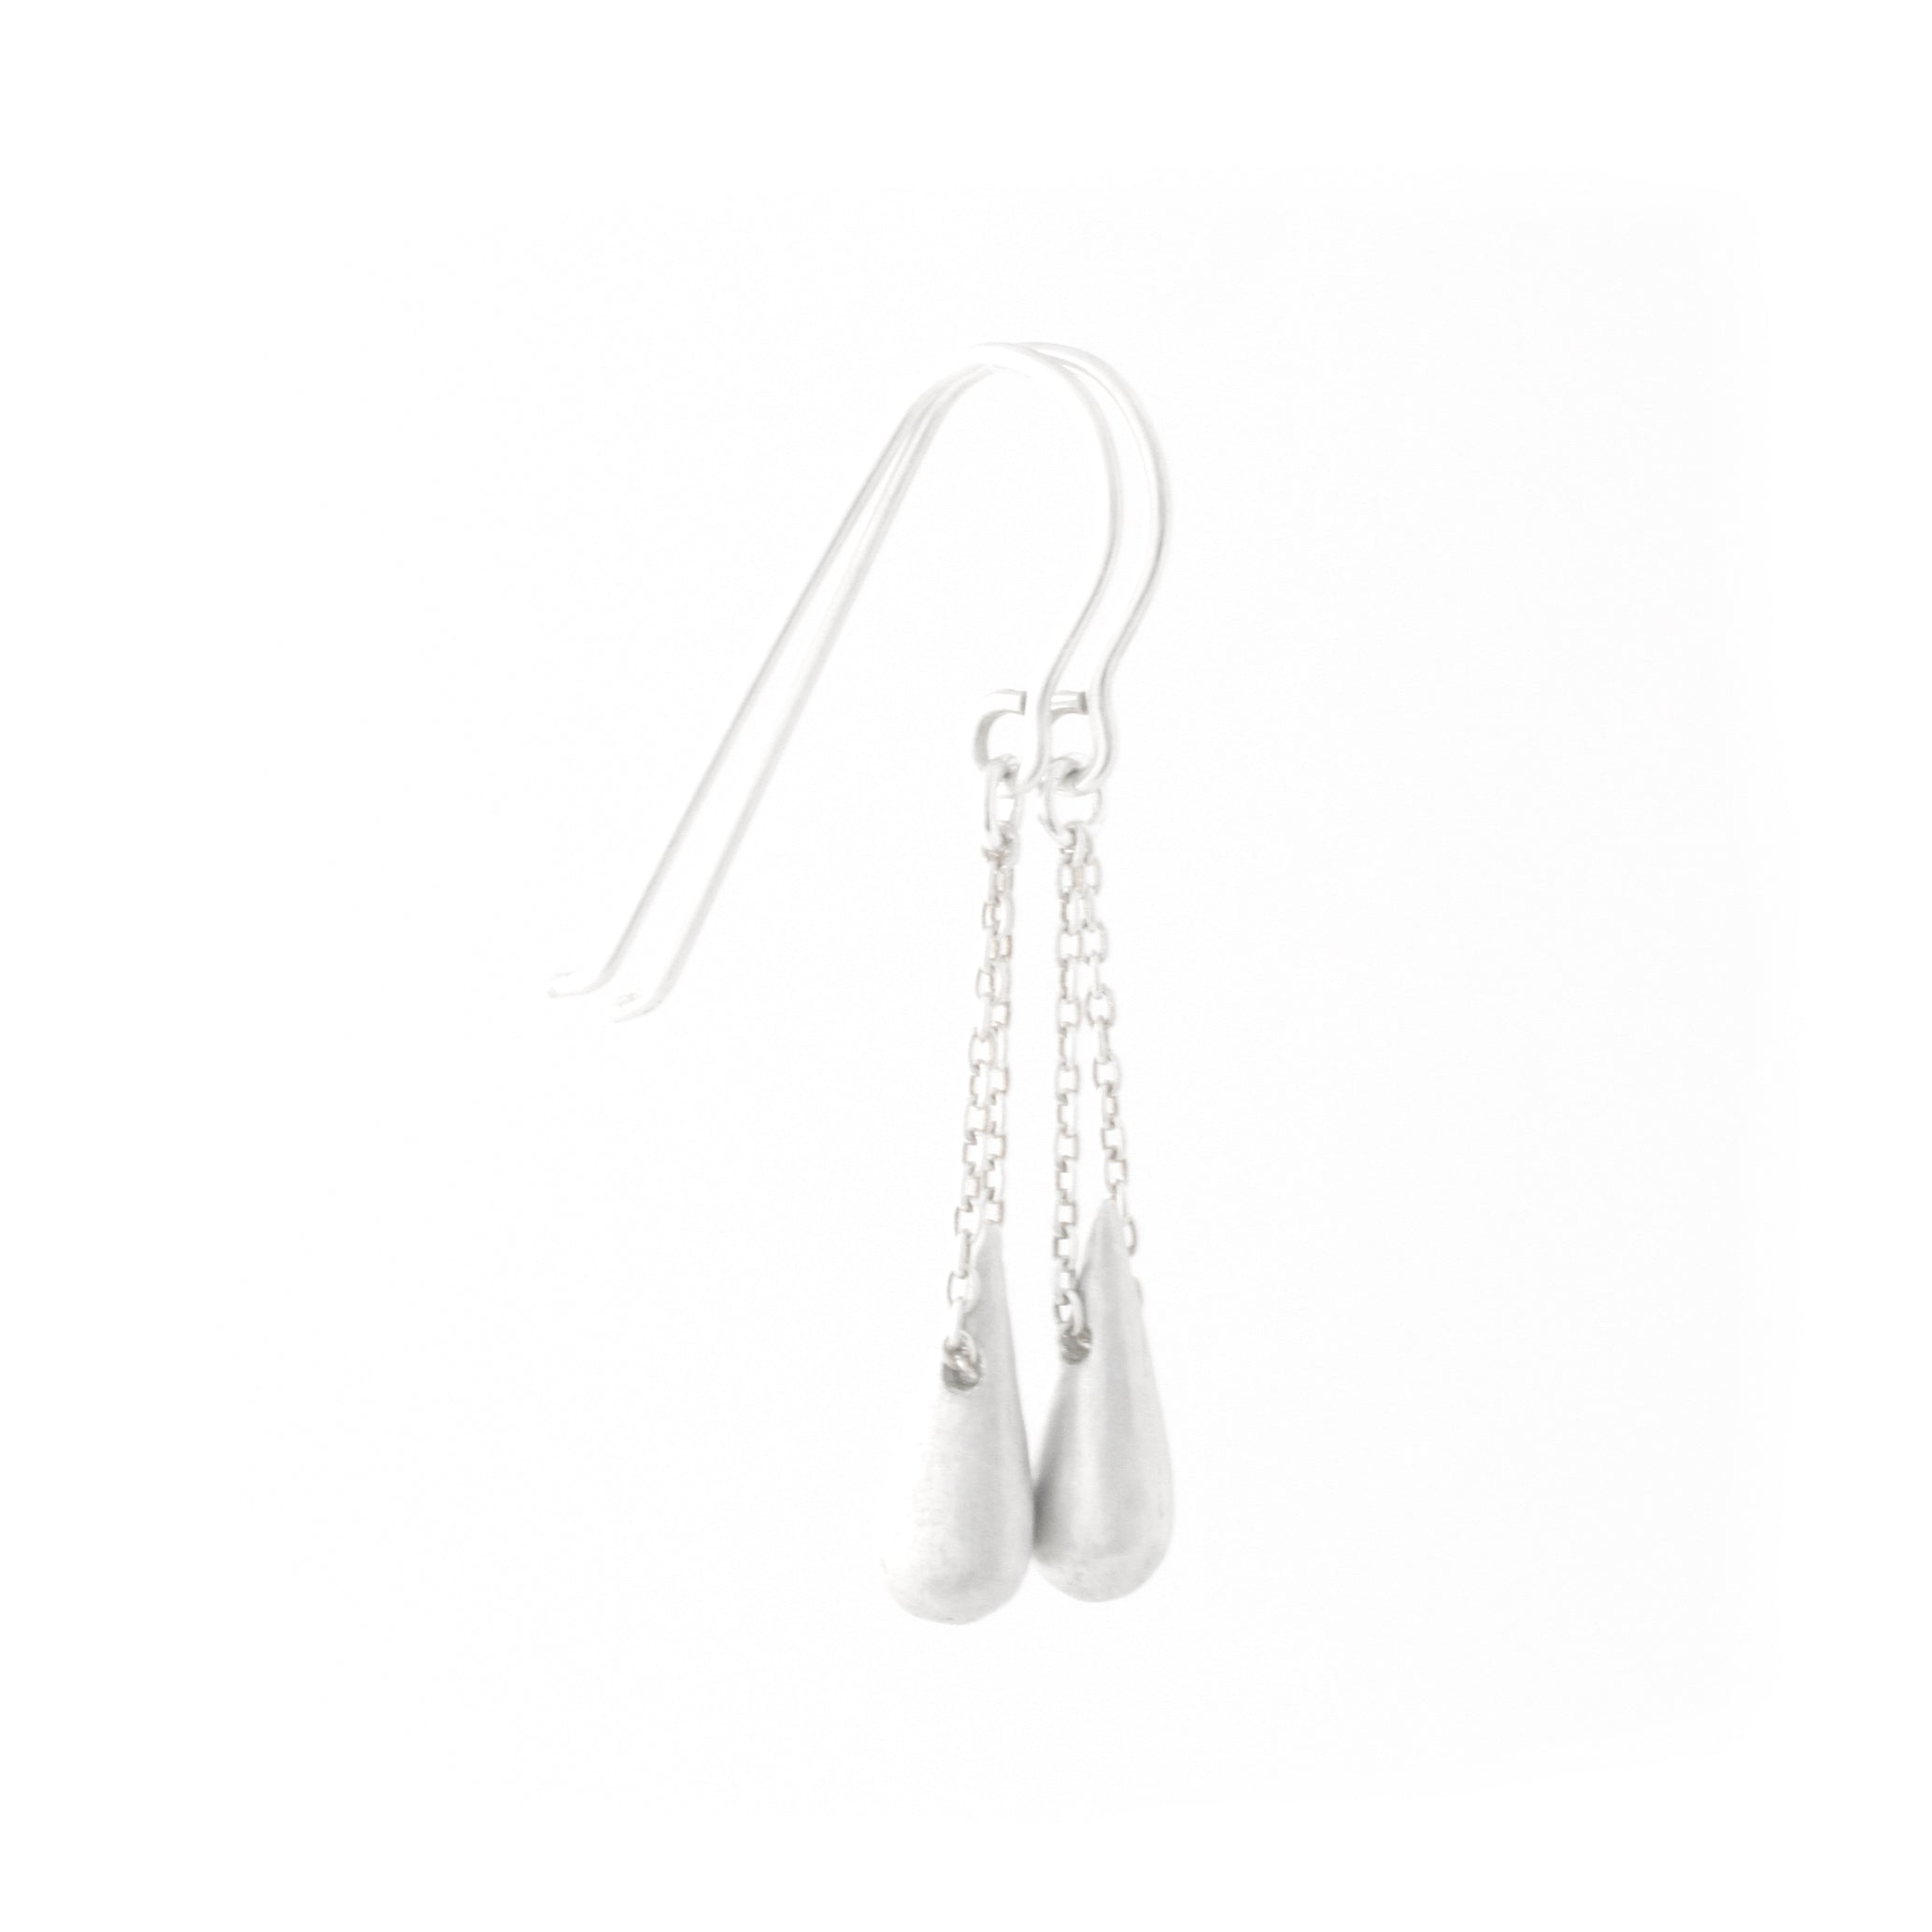 Raindrop Earrings (Small Sterling Silver)